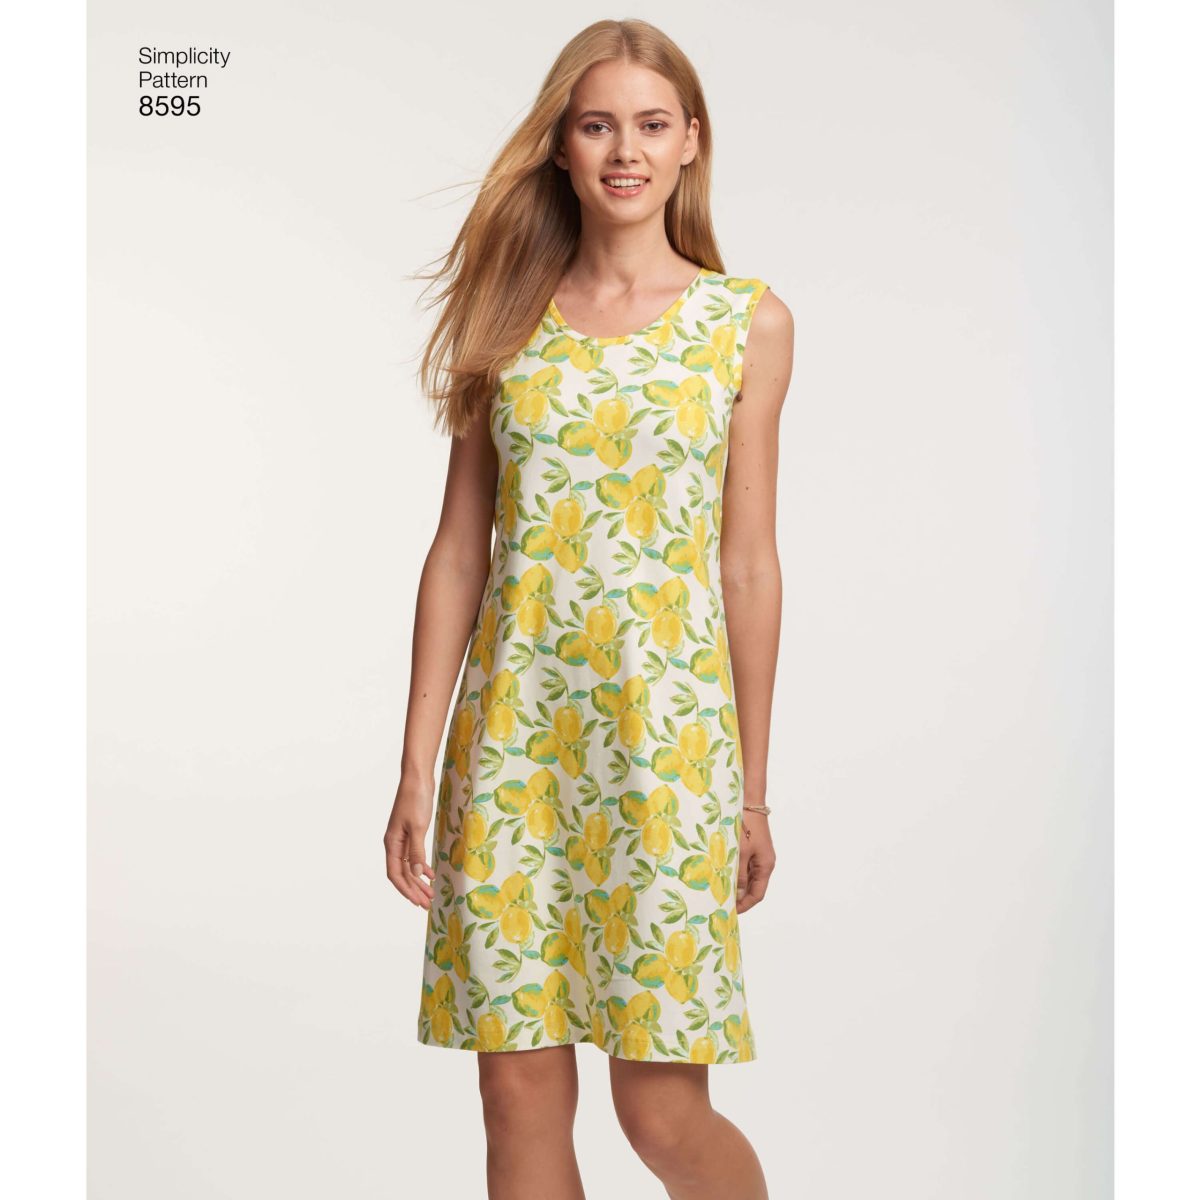 Simplicity Sewing Pattern 8595 Misses' Knit Dresses